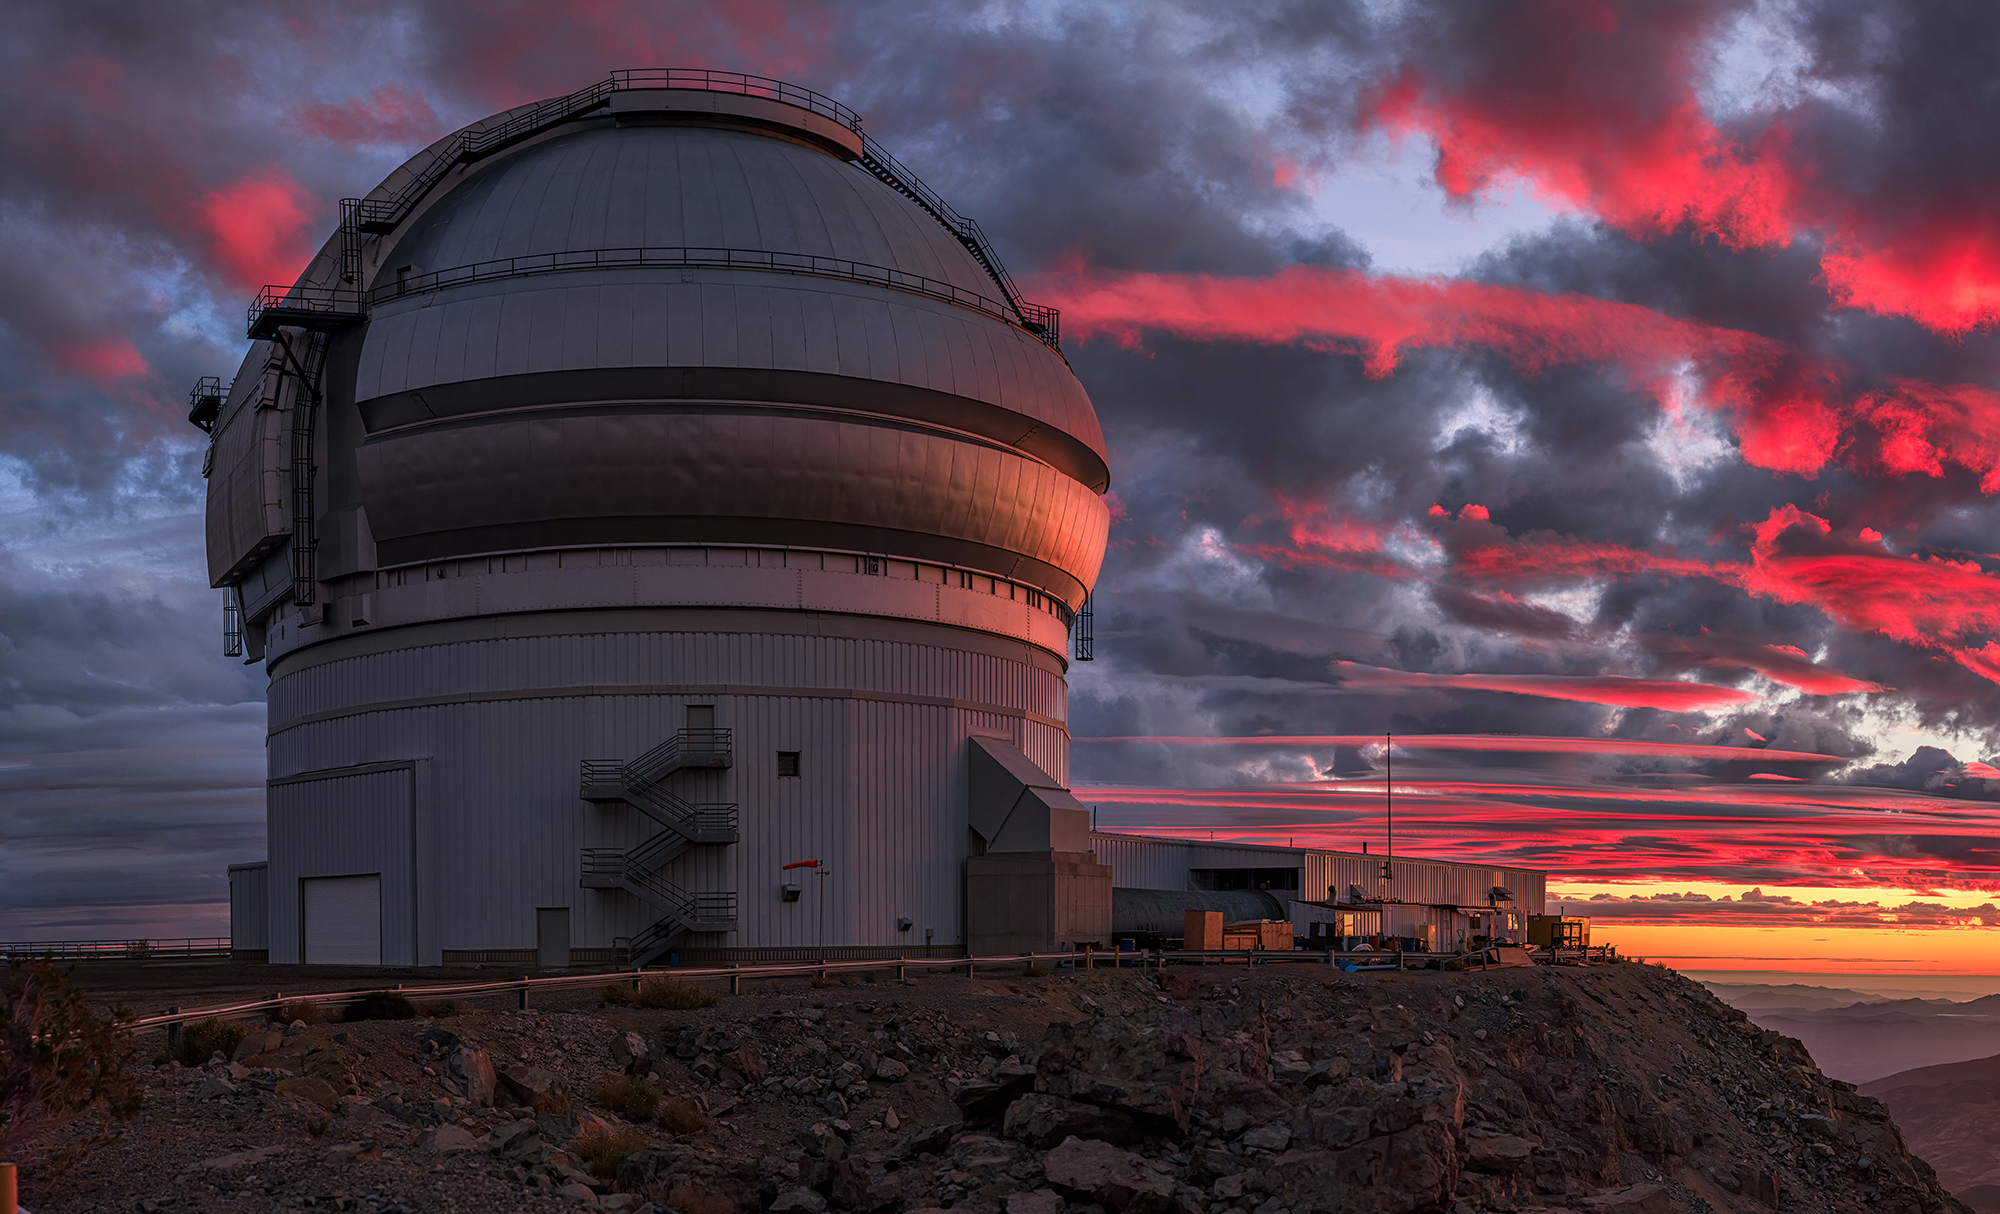 Gemini South, a telescope in the Chilean Andes